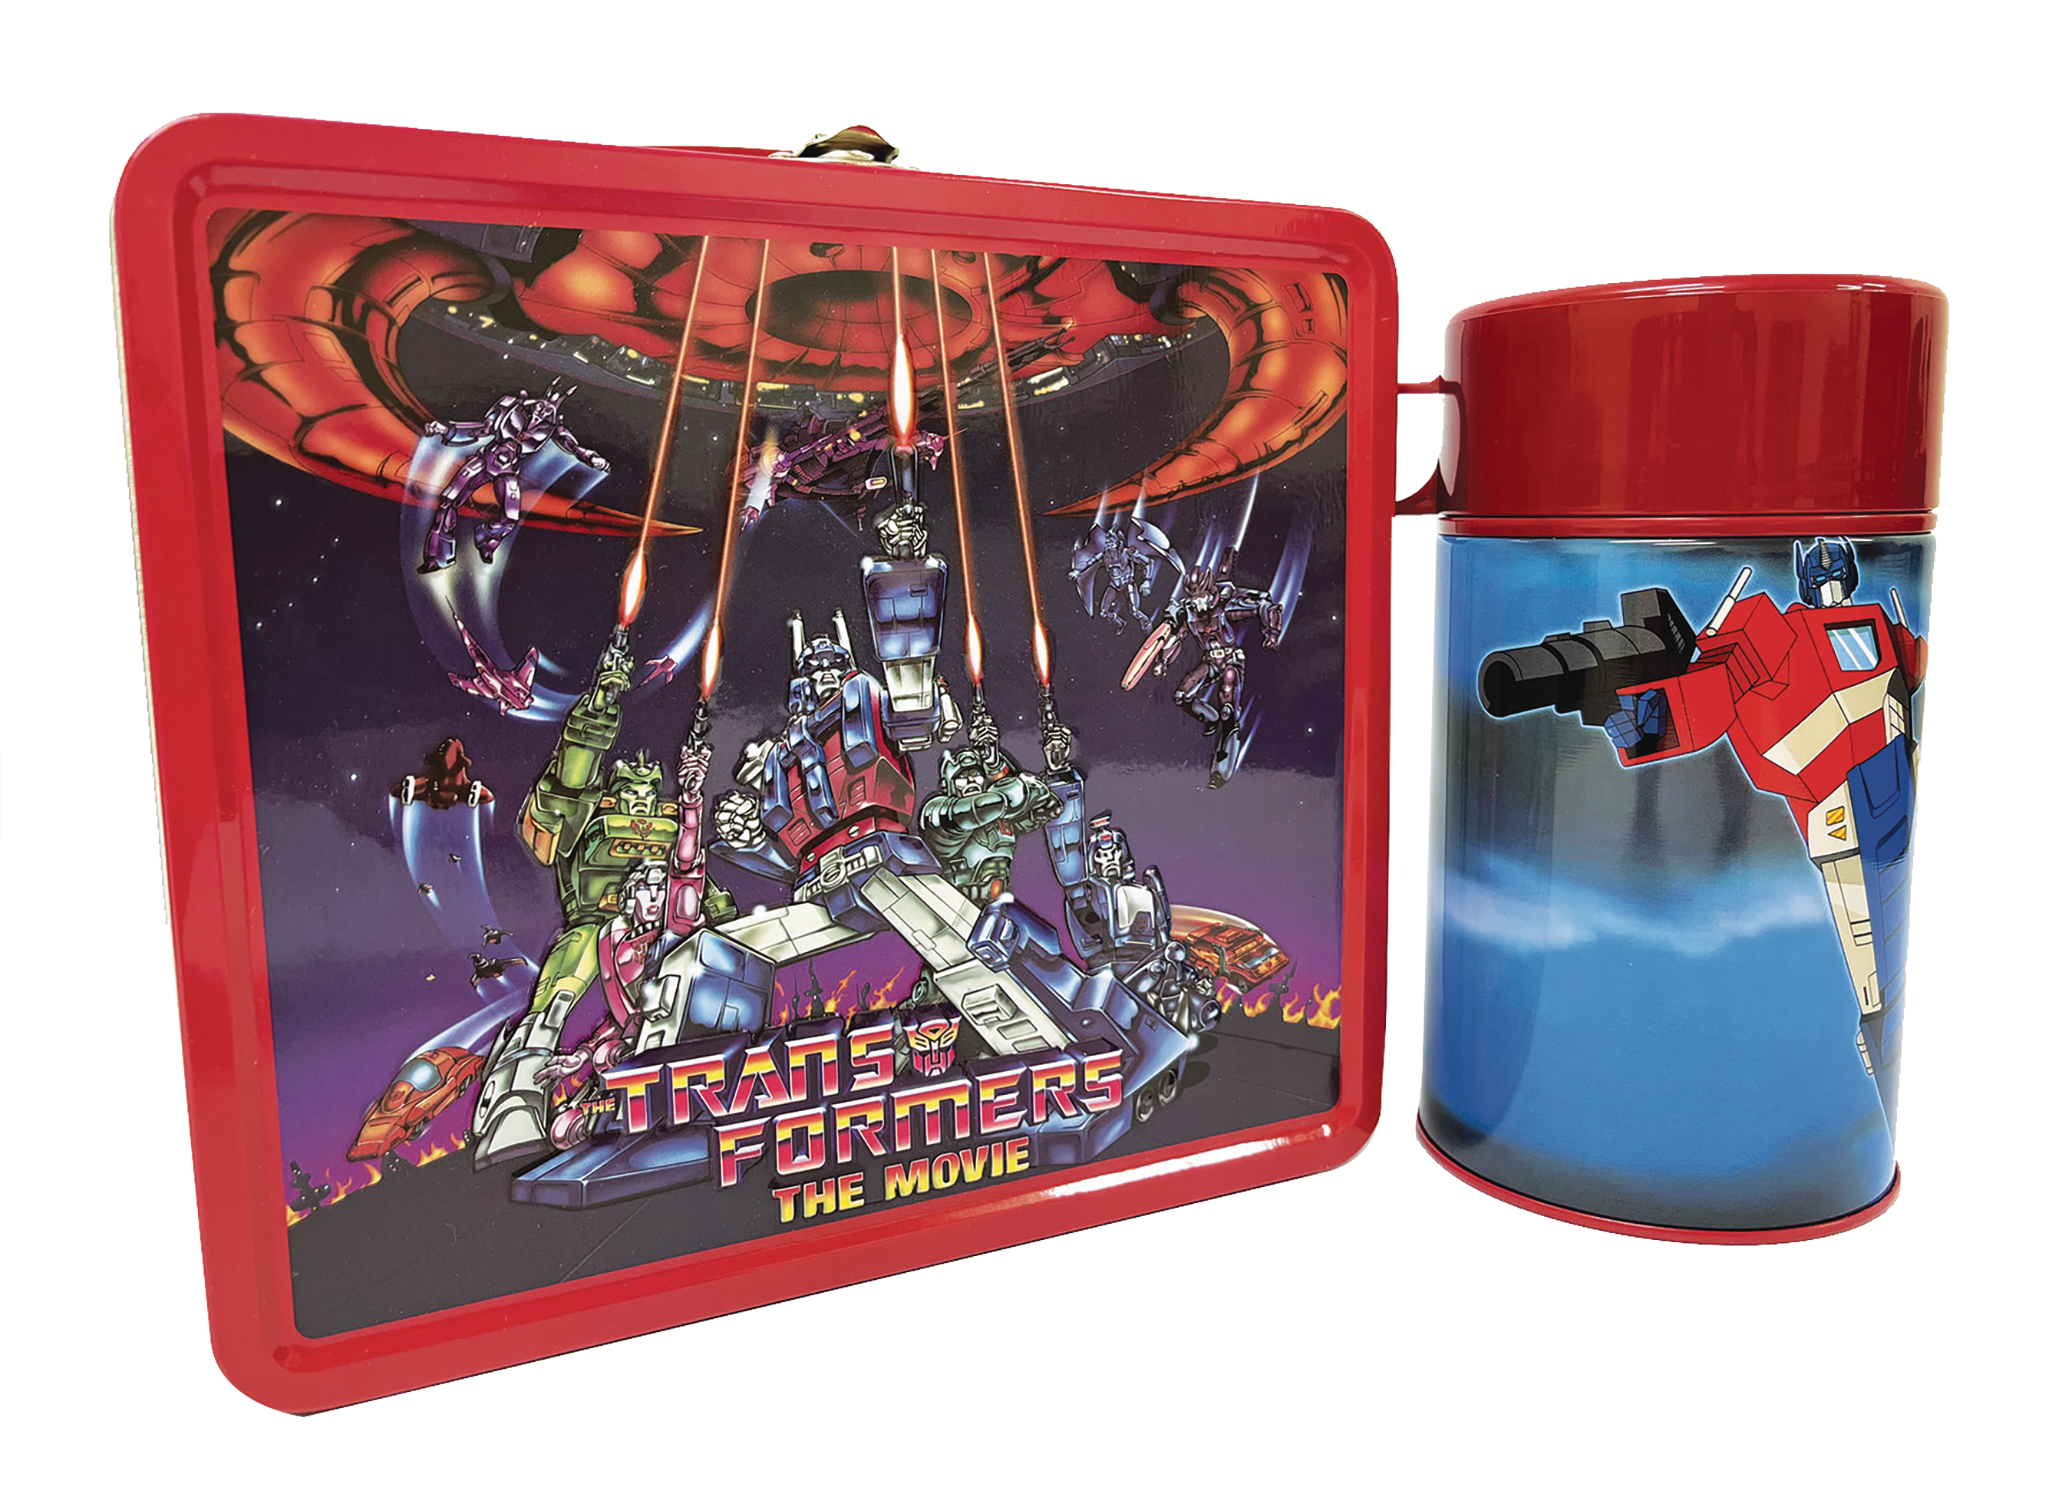 Tin Titans Transformers the Movie (1986) Lunchbox & Bev Container 